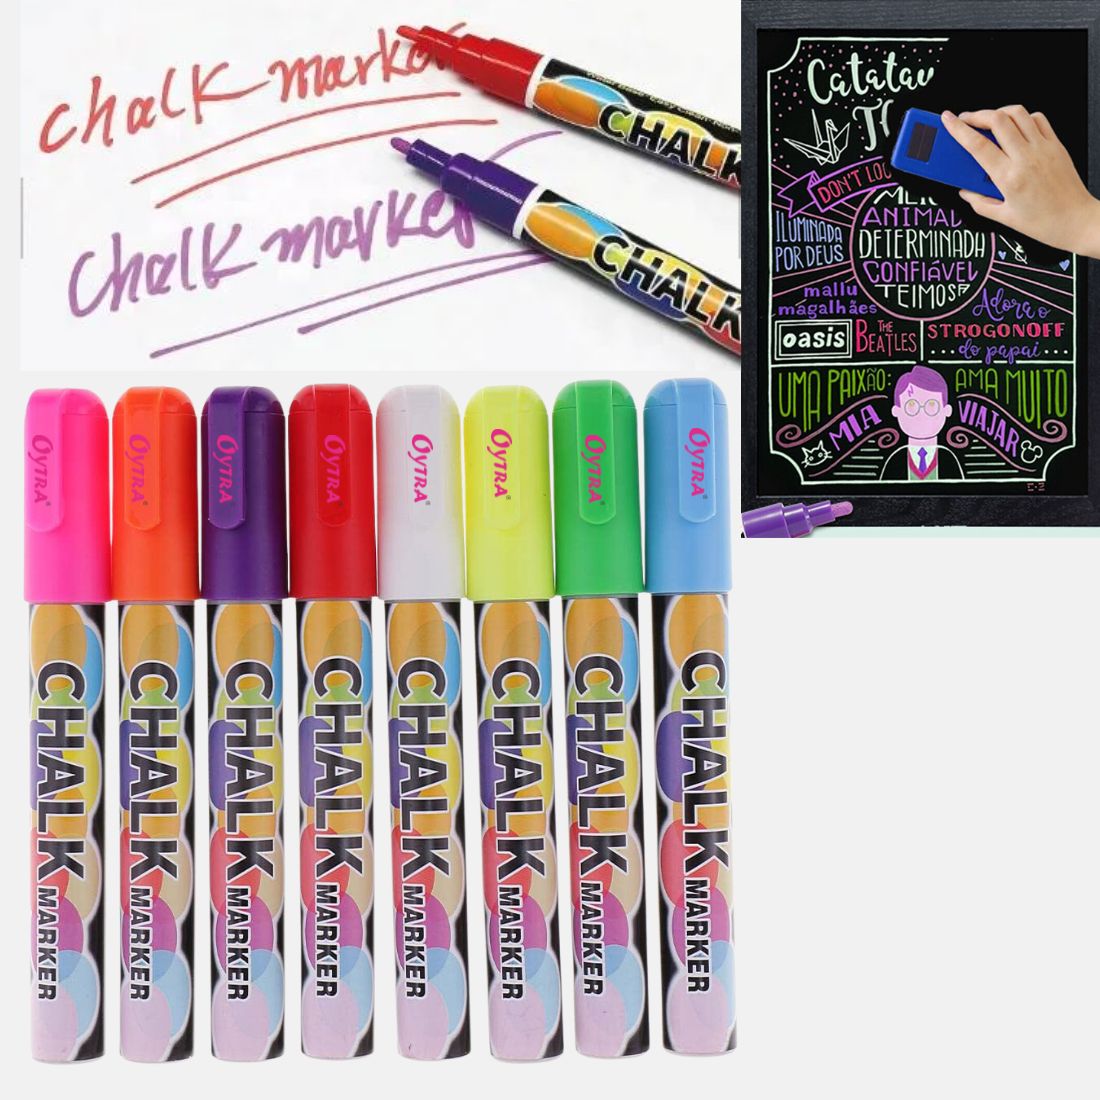  Metallic Liquid Chalk Markers - Dry Erase Marker Pens - Chalk  Markers for Chalkboards, Signs, Windows, Blackboard, Glass - Reversible Tip  (8 Pack) - 24 Chalkboard Labels Included (Metallic, 6mm) : Arts, Crafts &  Sewing